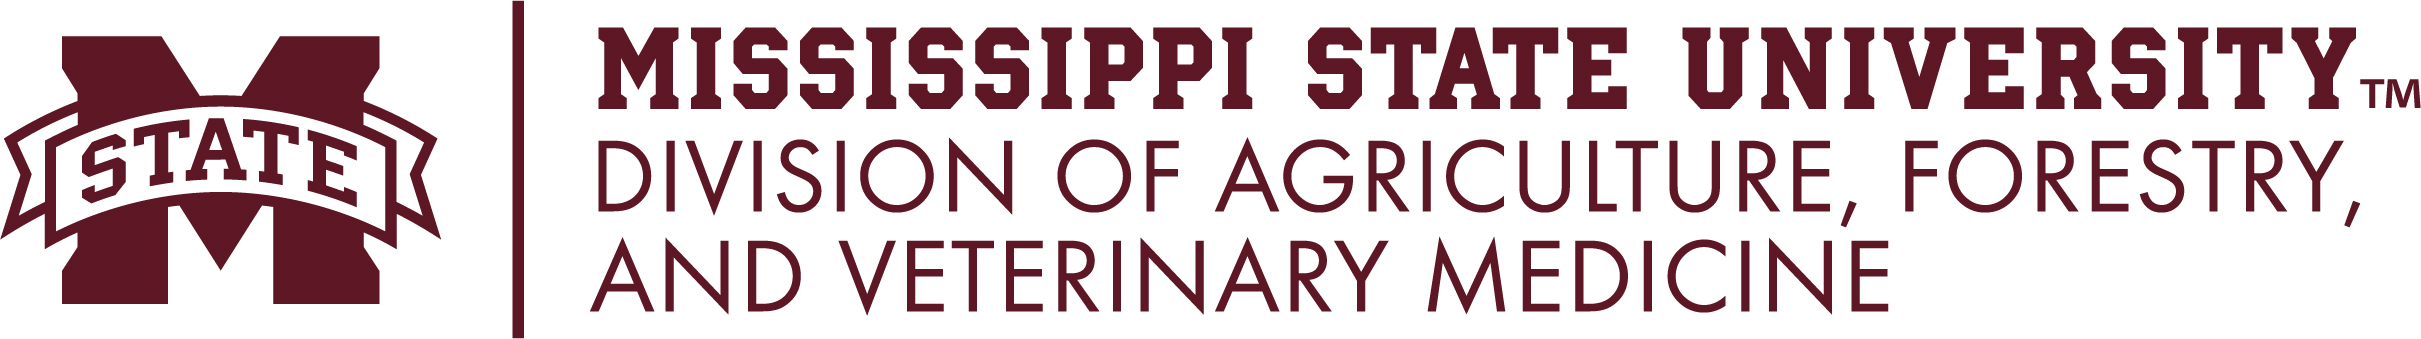 Division of Agriculture, Forestry and Veterinary Medicine